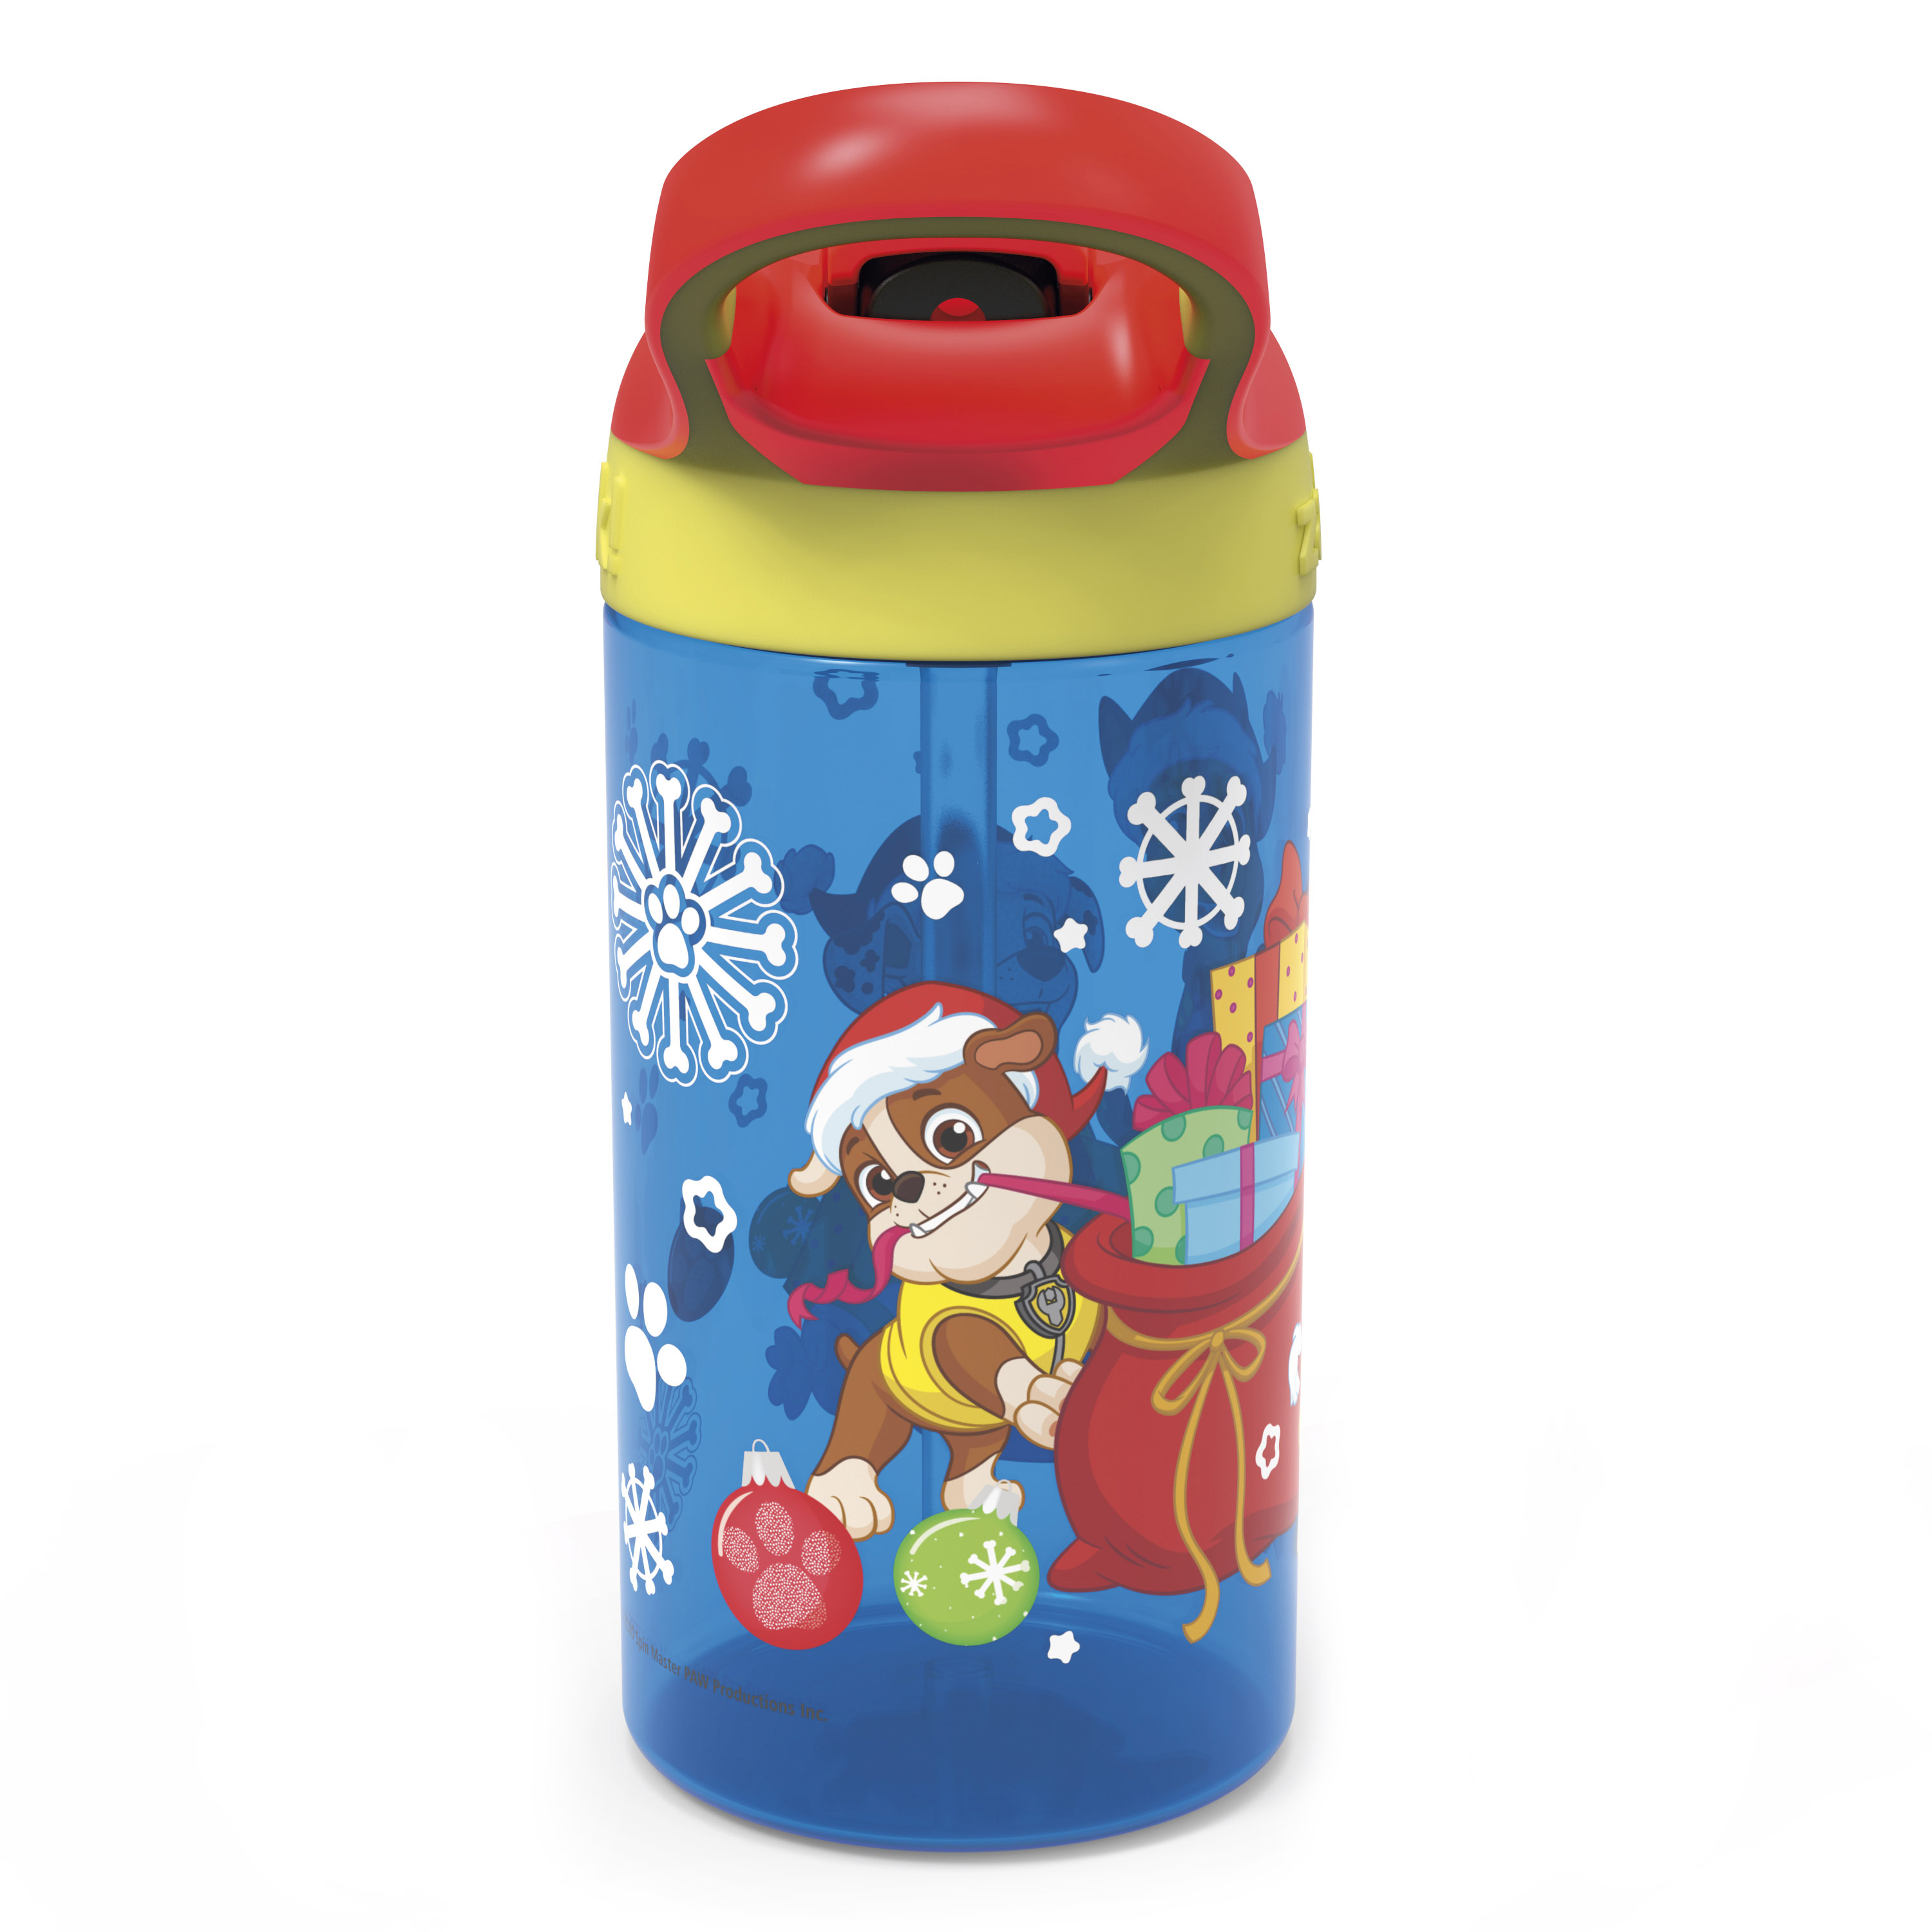 Paw Patrol 16 ounce Water Bottle, Chase, Marshall & Friends slideshow image 1